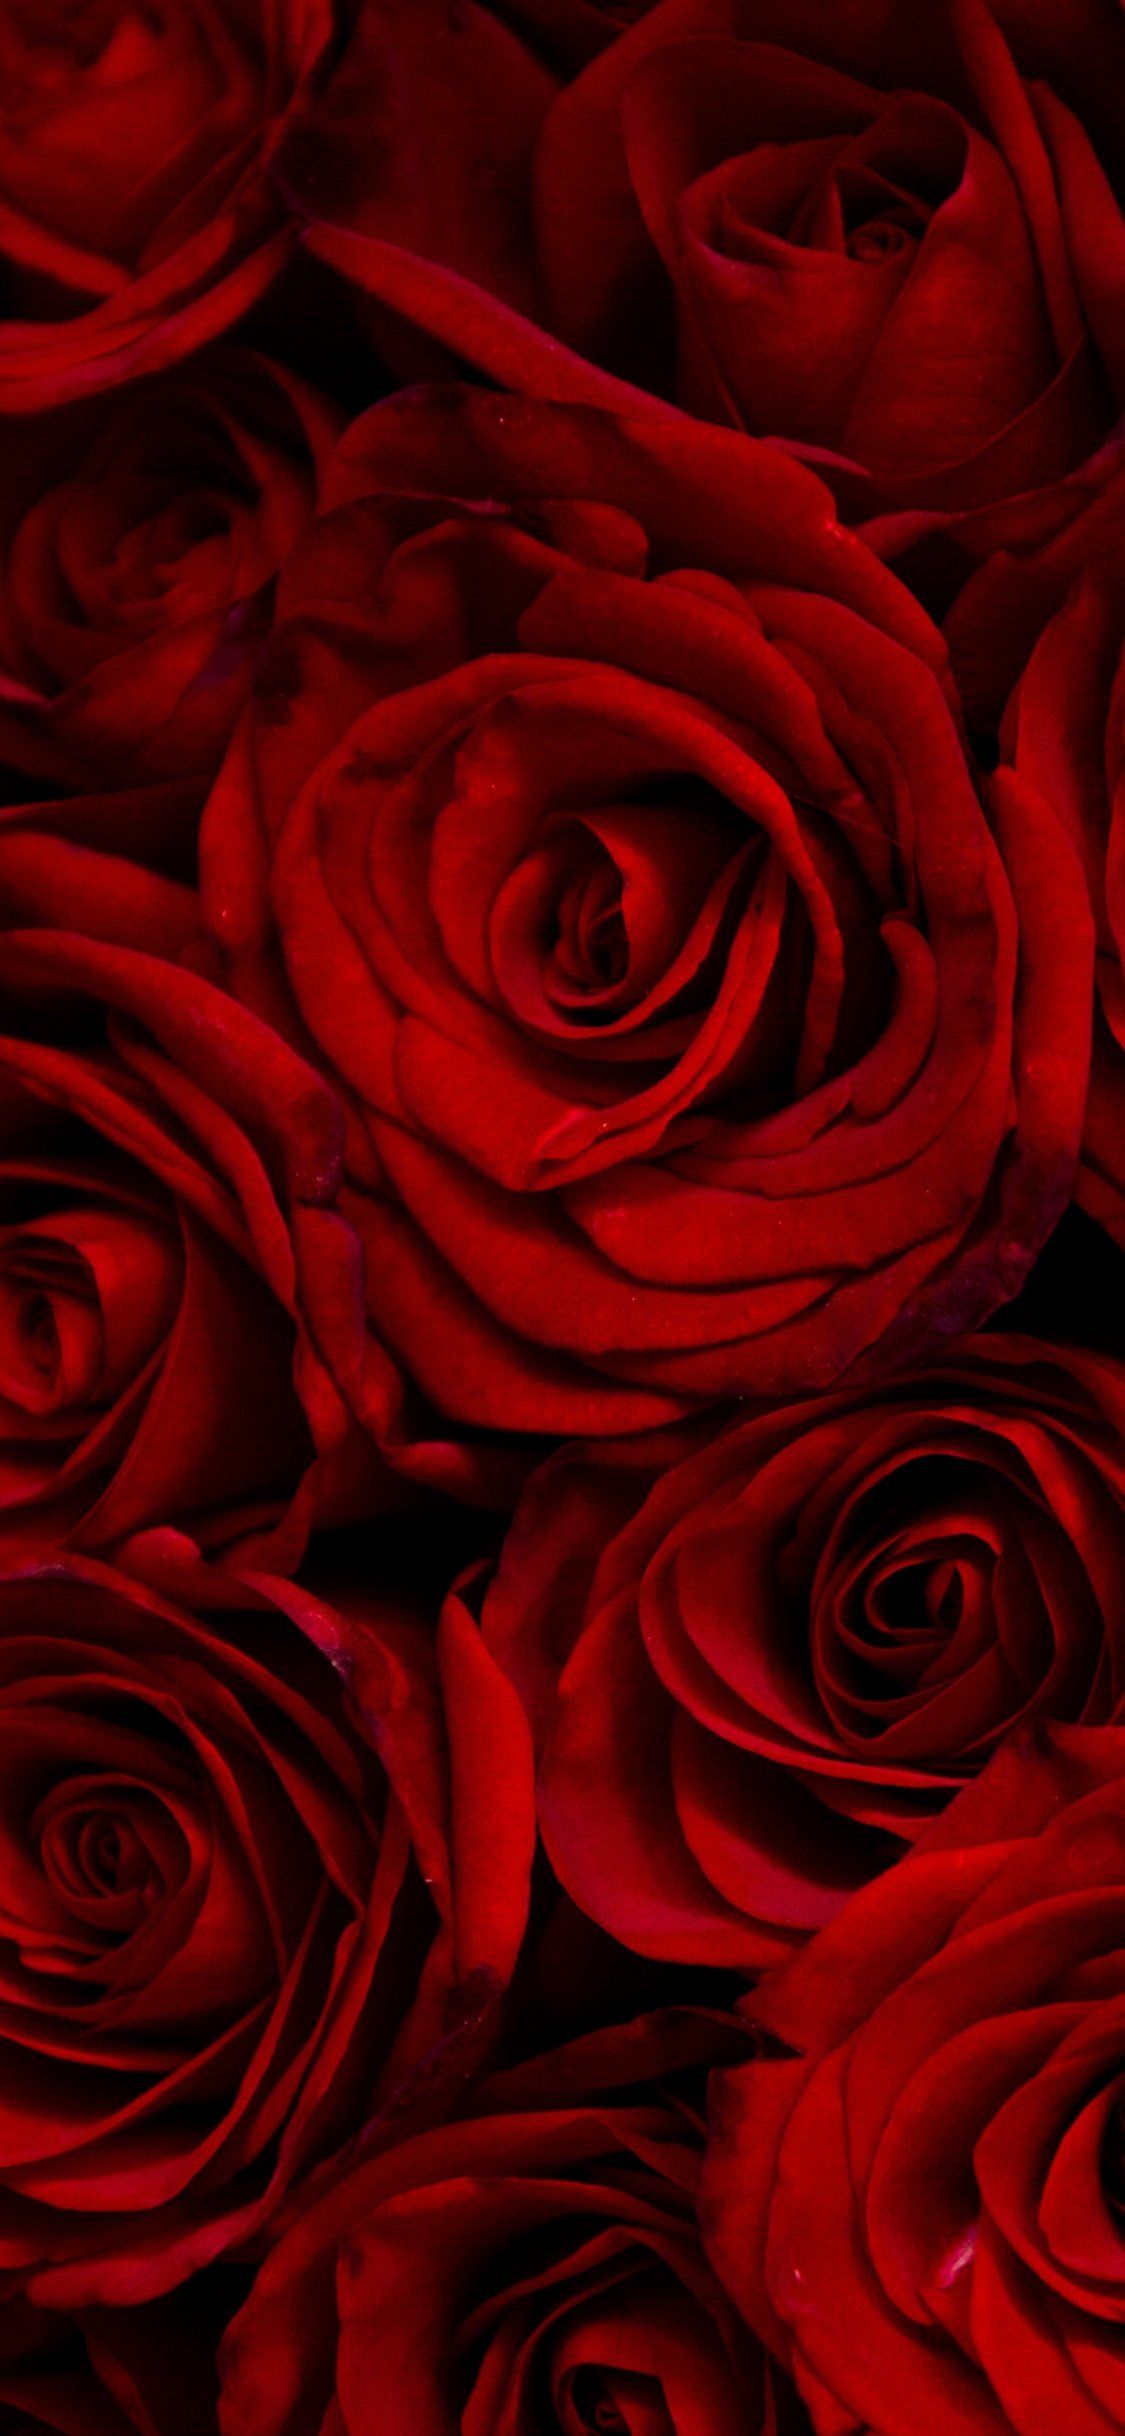 A bouquet of red roses. - Roses